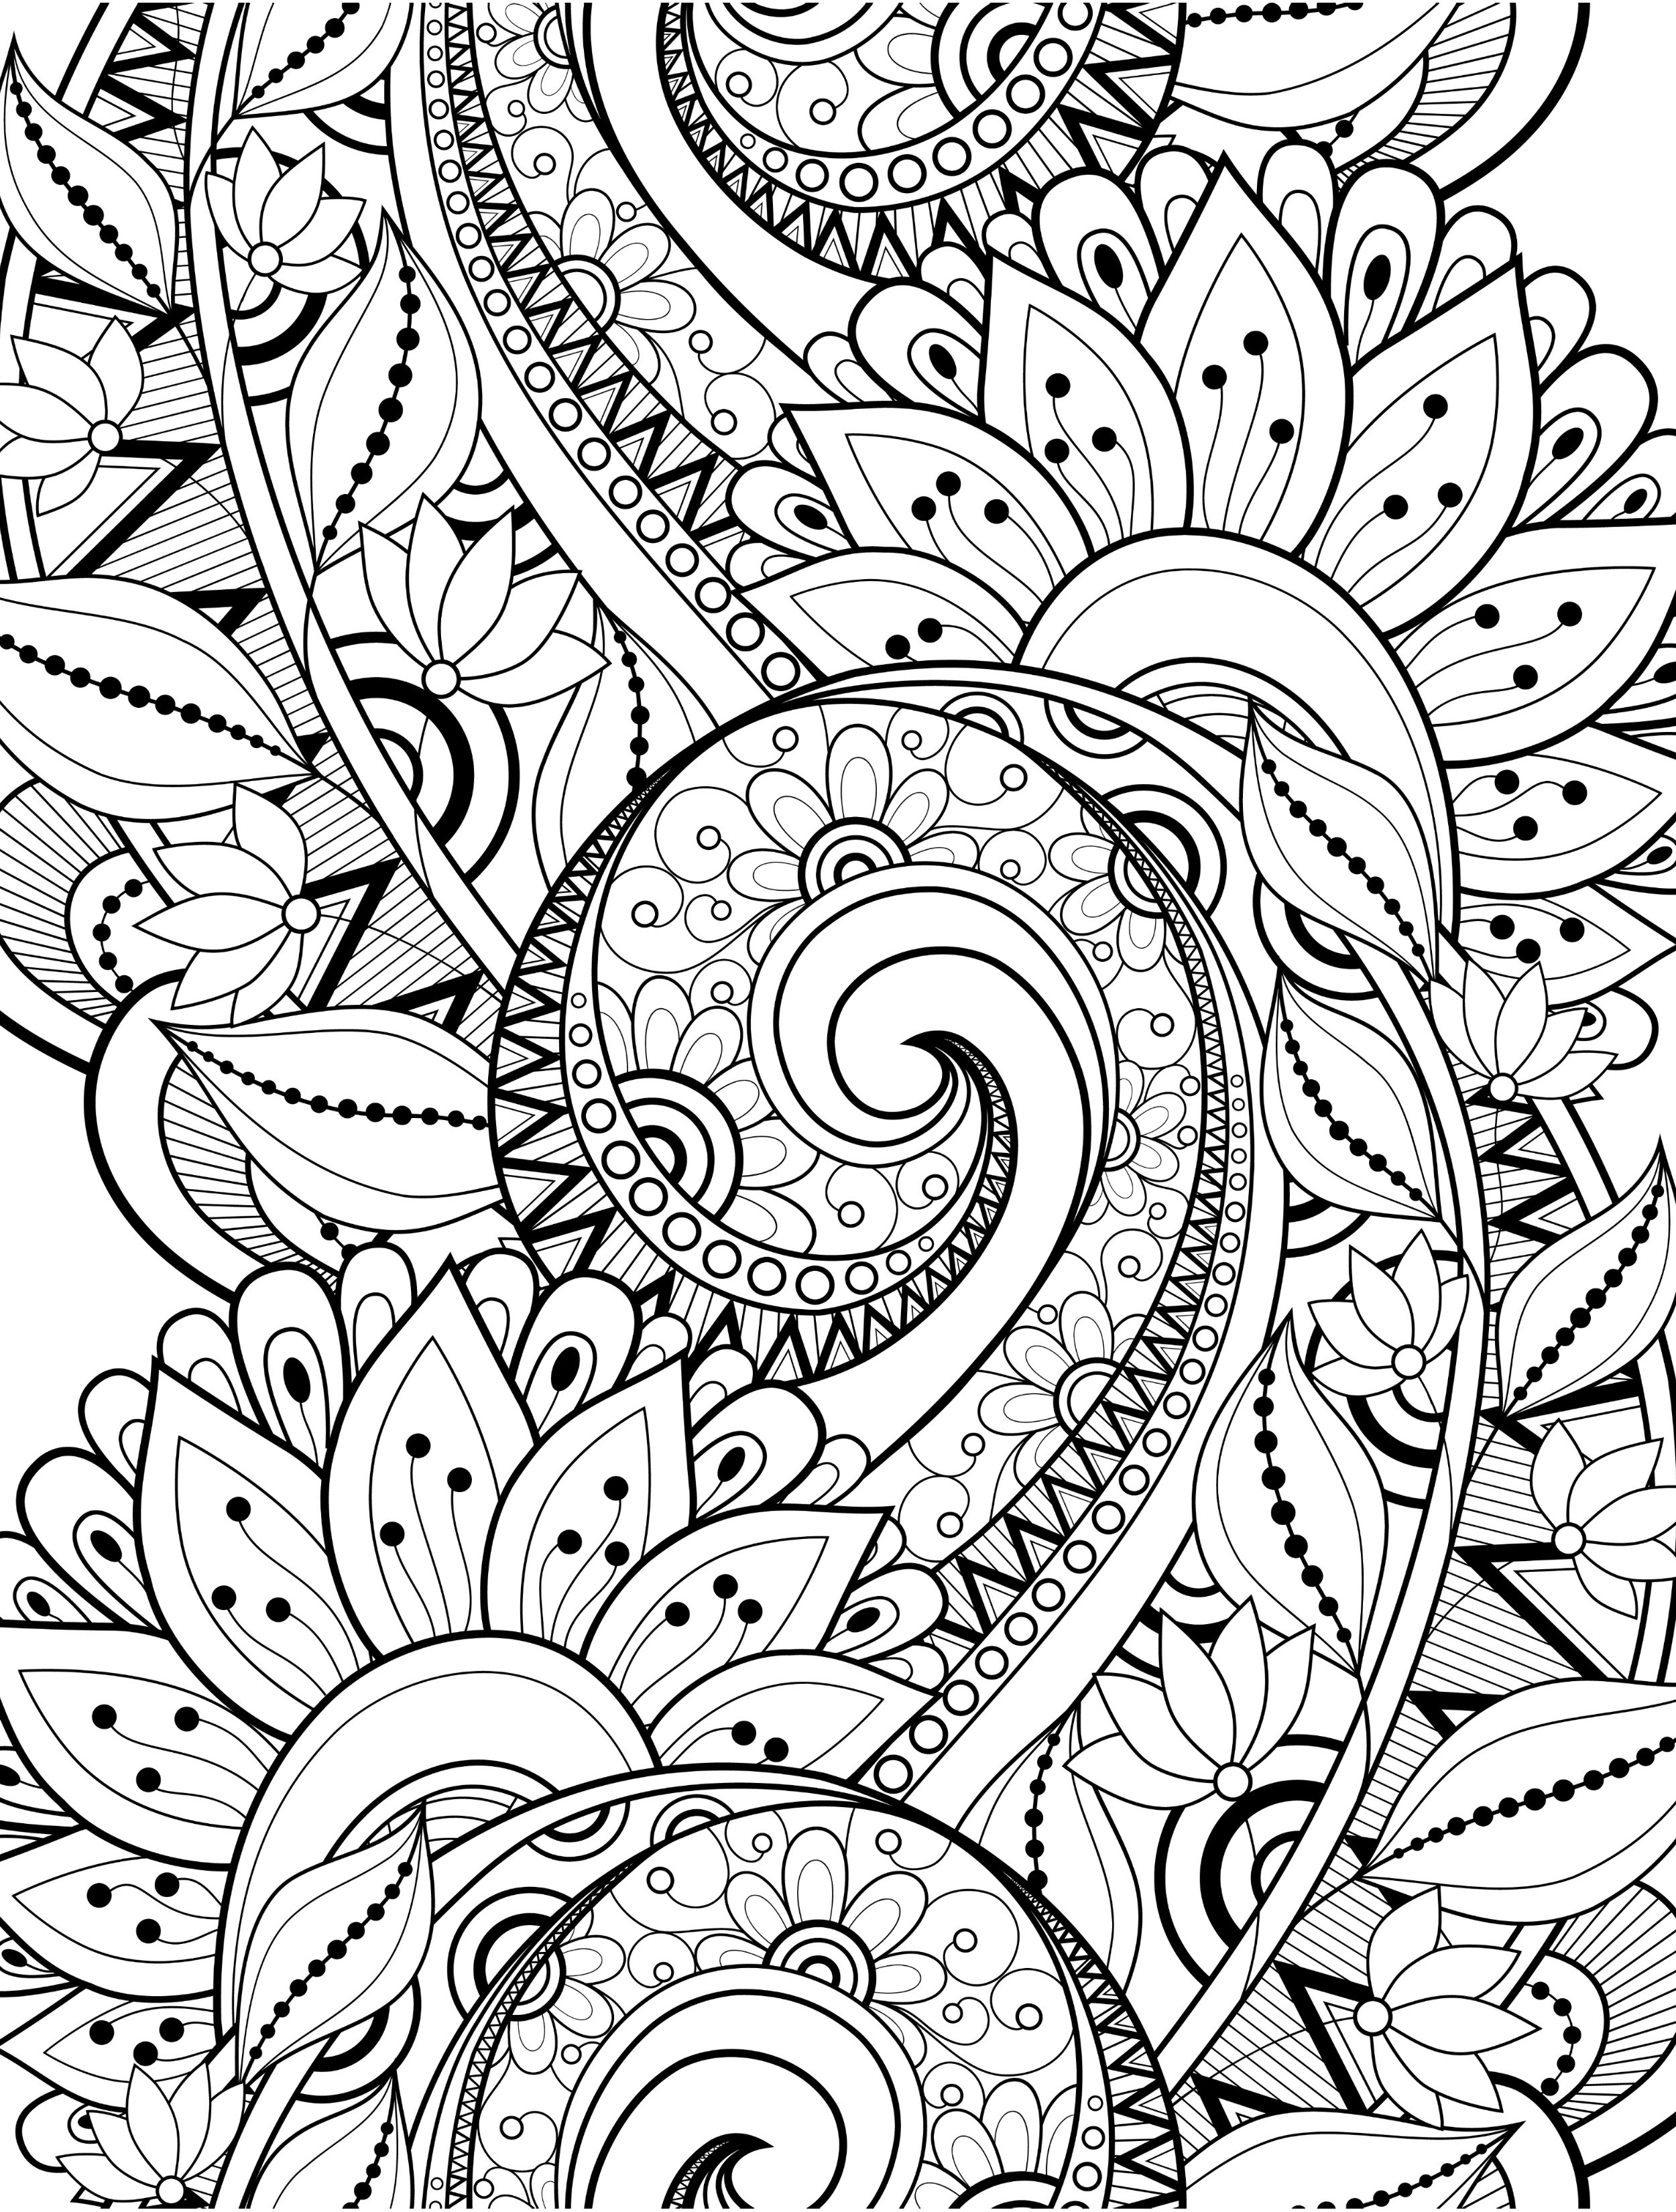 Advanced Coloring Books For Adults
 15 CRAZY Busy Coloring Pages for Adults Page 6 of 16